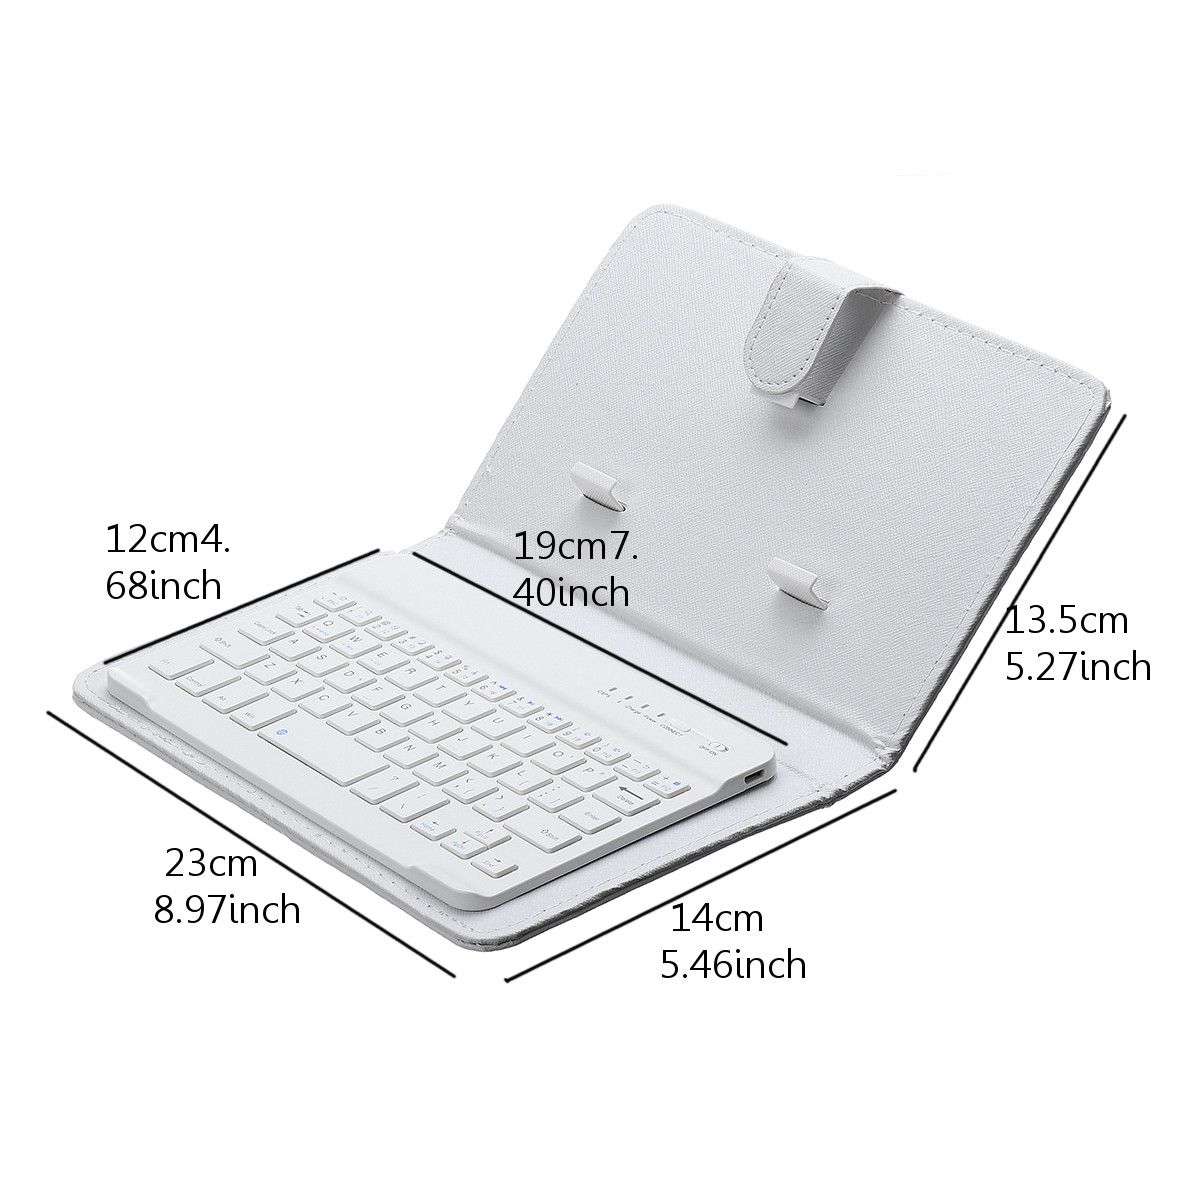 Portable-PU-Leather-Wireless-bluetooth-Keyboard-Case-Holder-For-Smartphone-Tablet-1639921